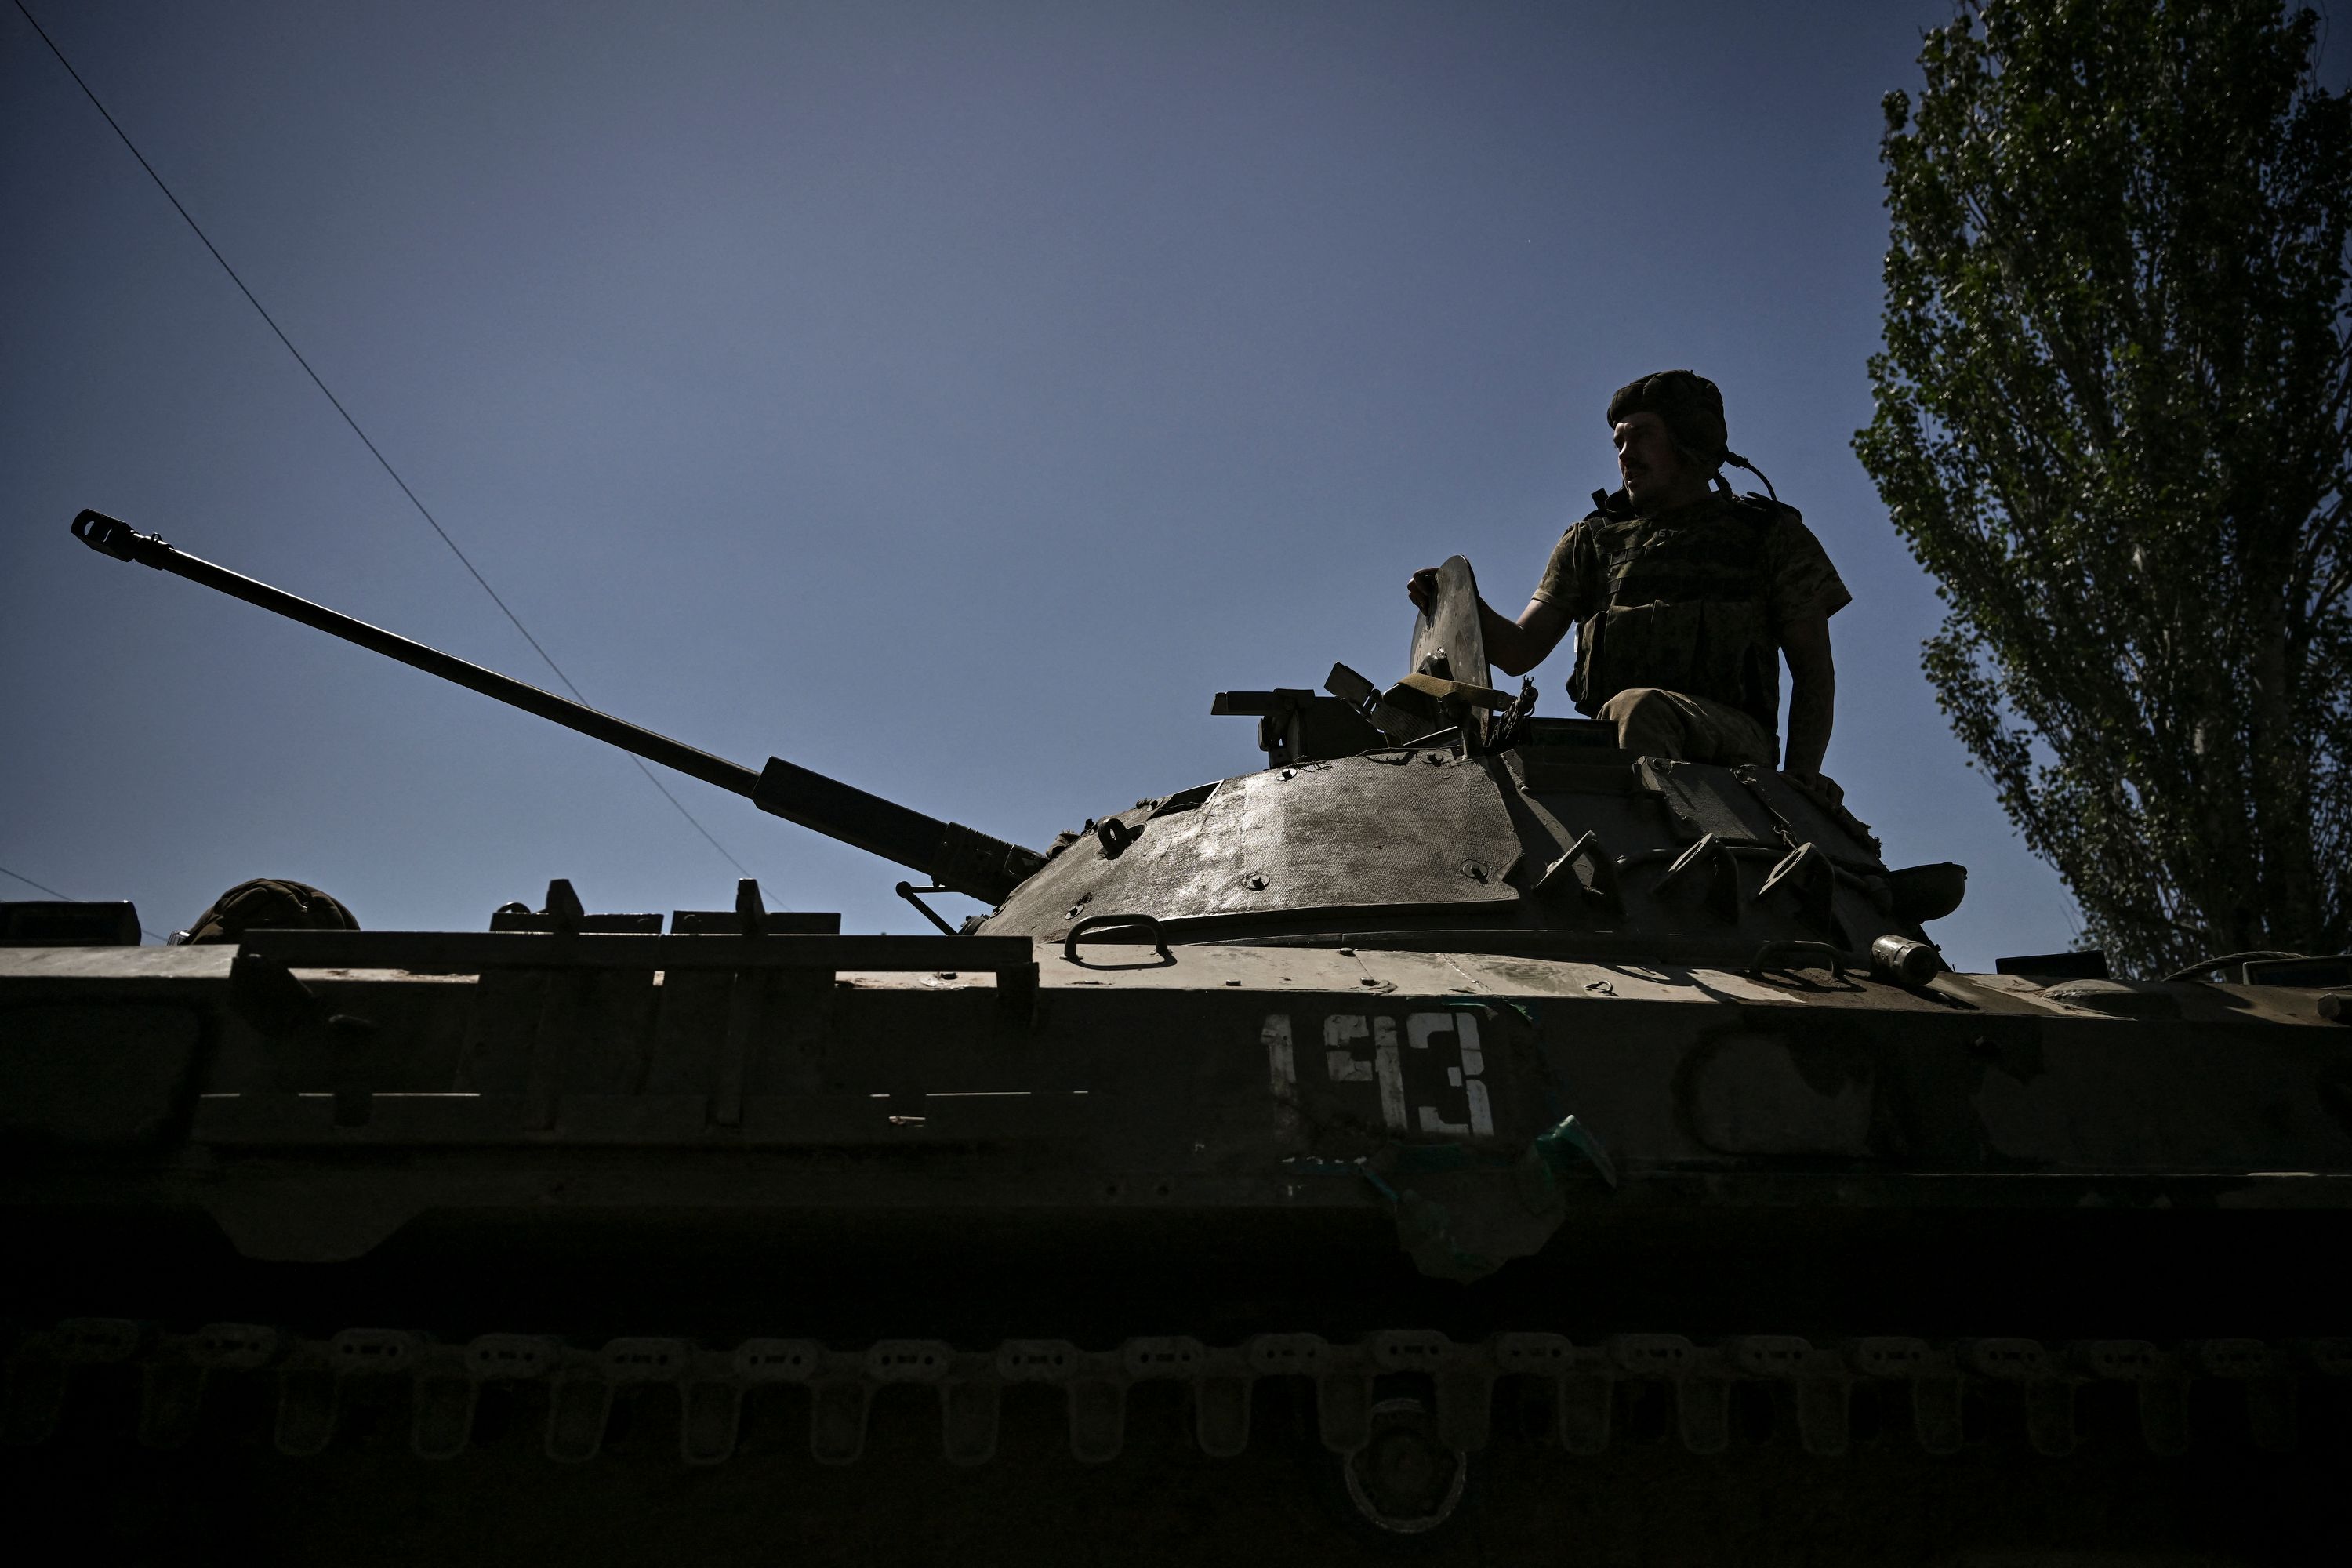 Ukraine’s At Risk of Losing War With Russia: Military Official – Newsweek